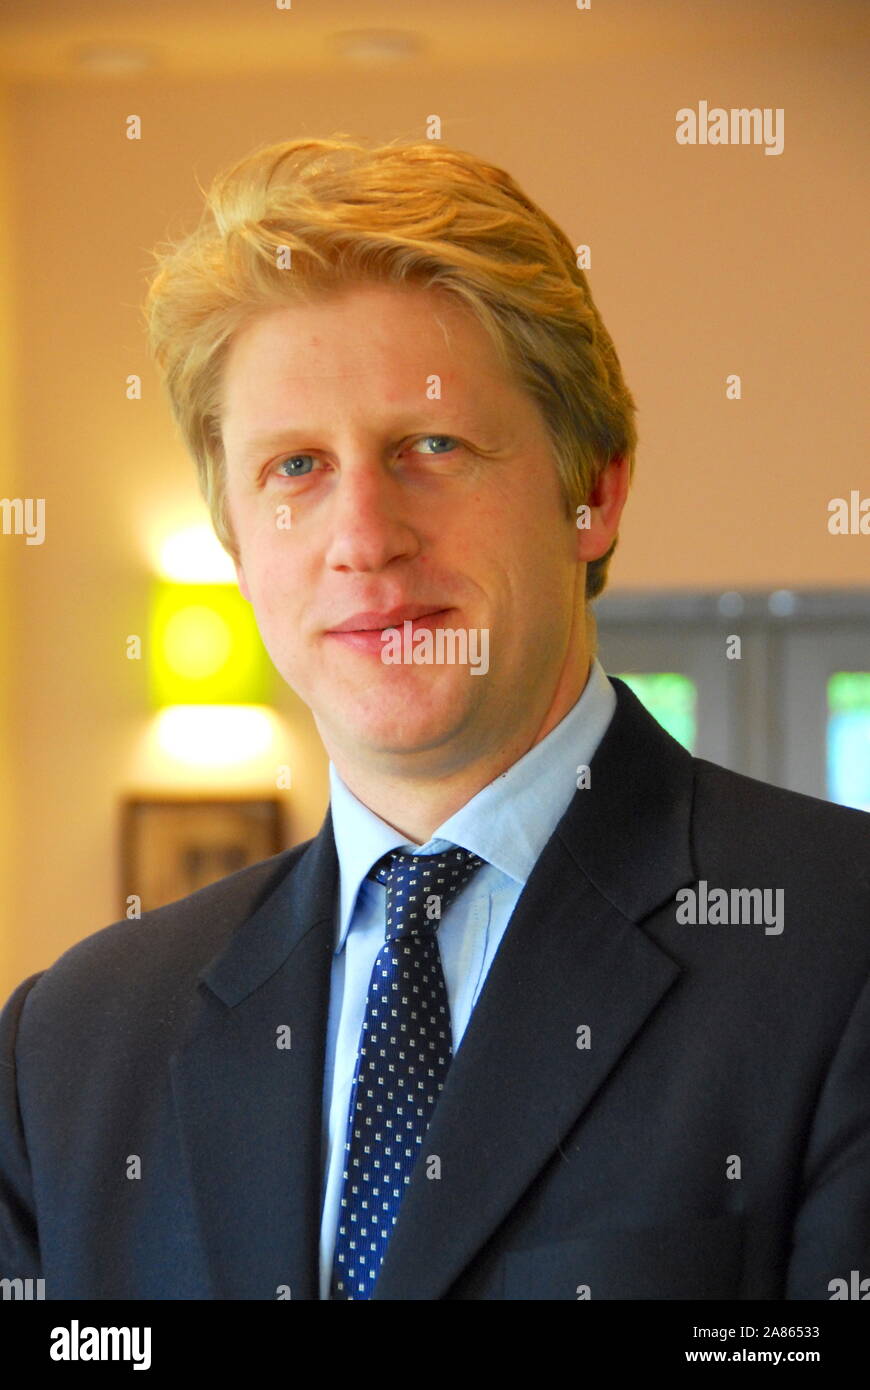 Jo Johnson Conservative Member of Parliment and former MP for Orpington. Stock Photo